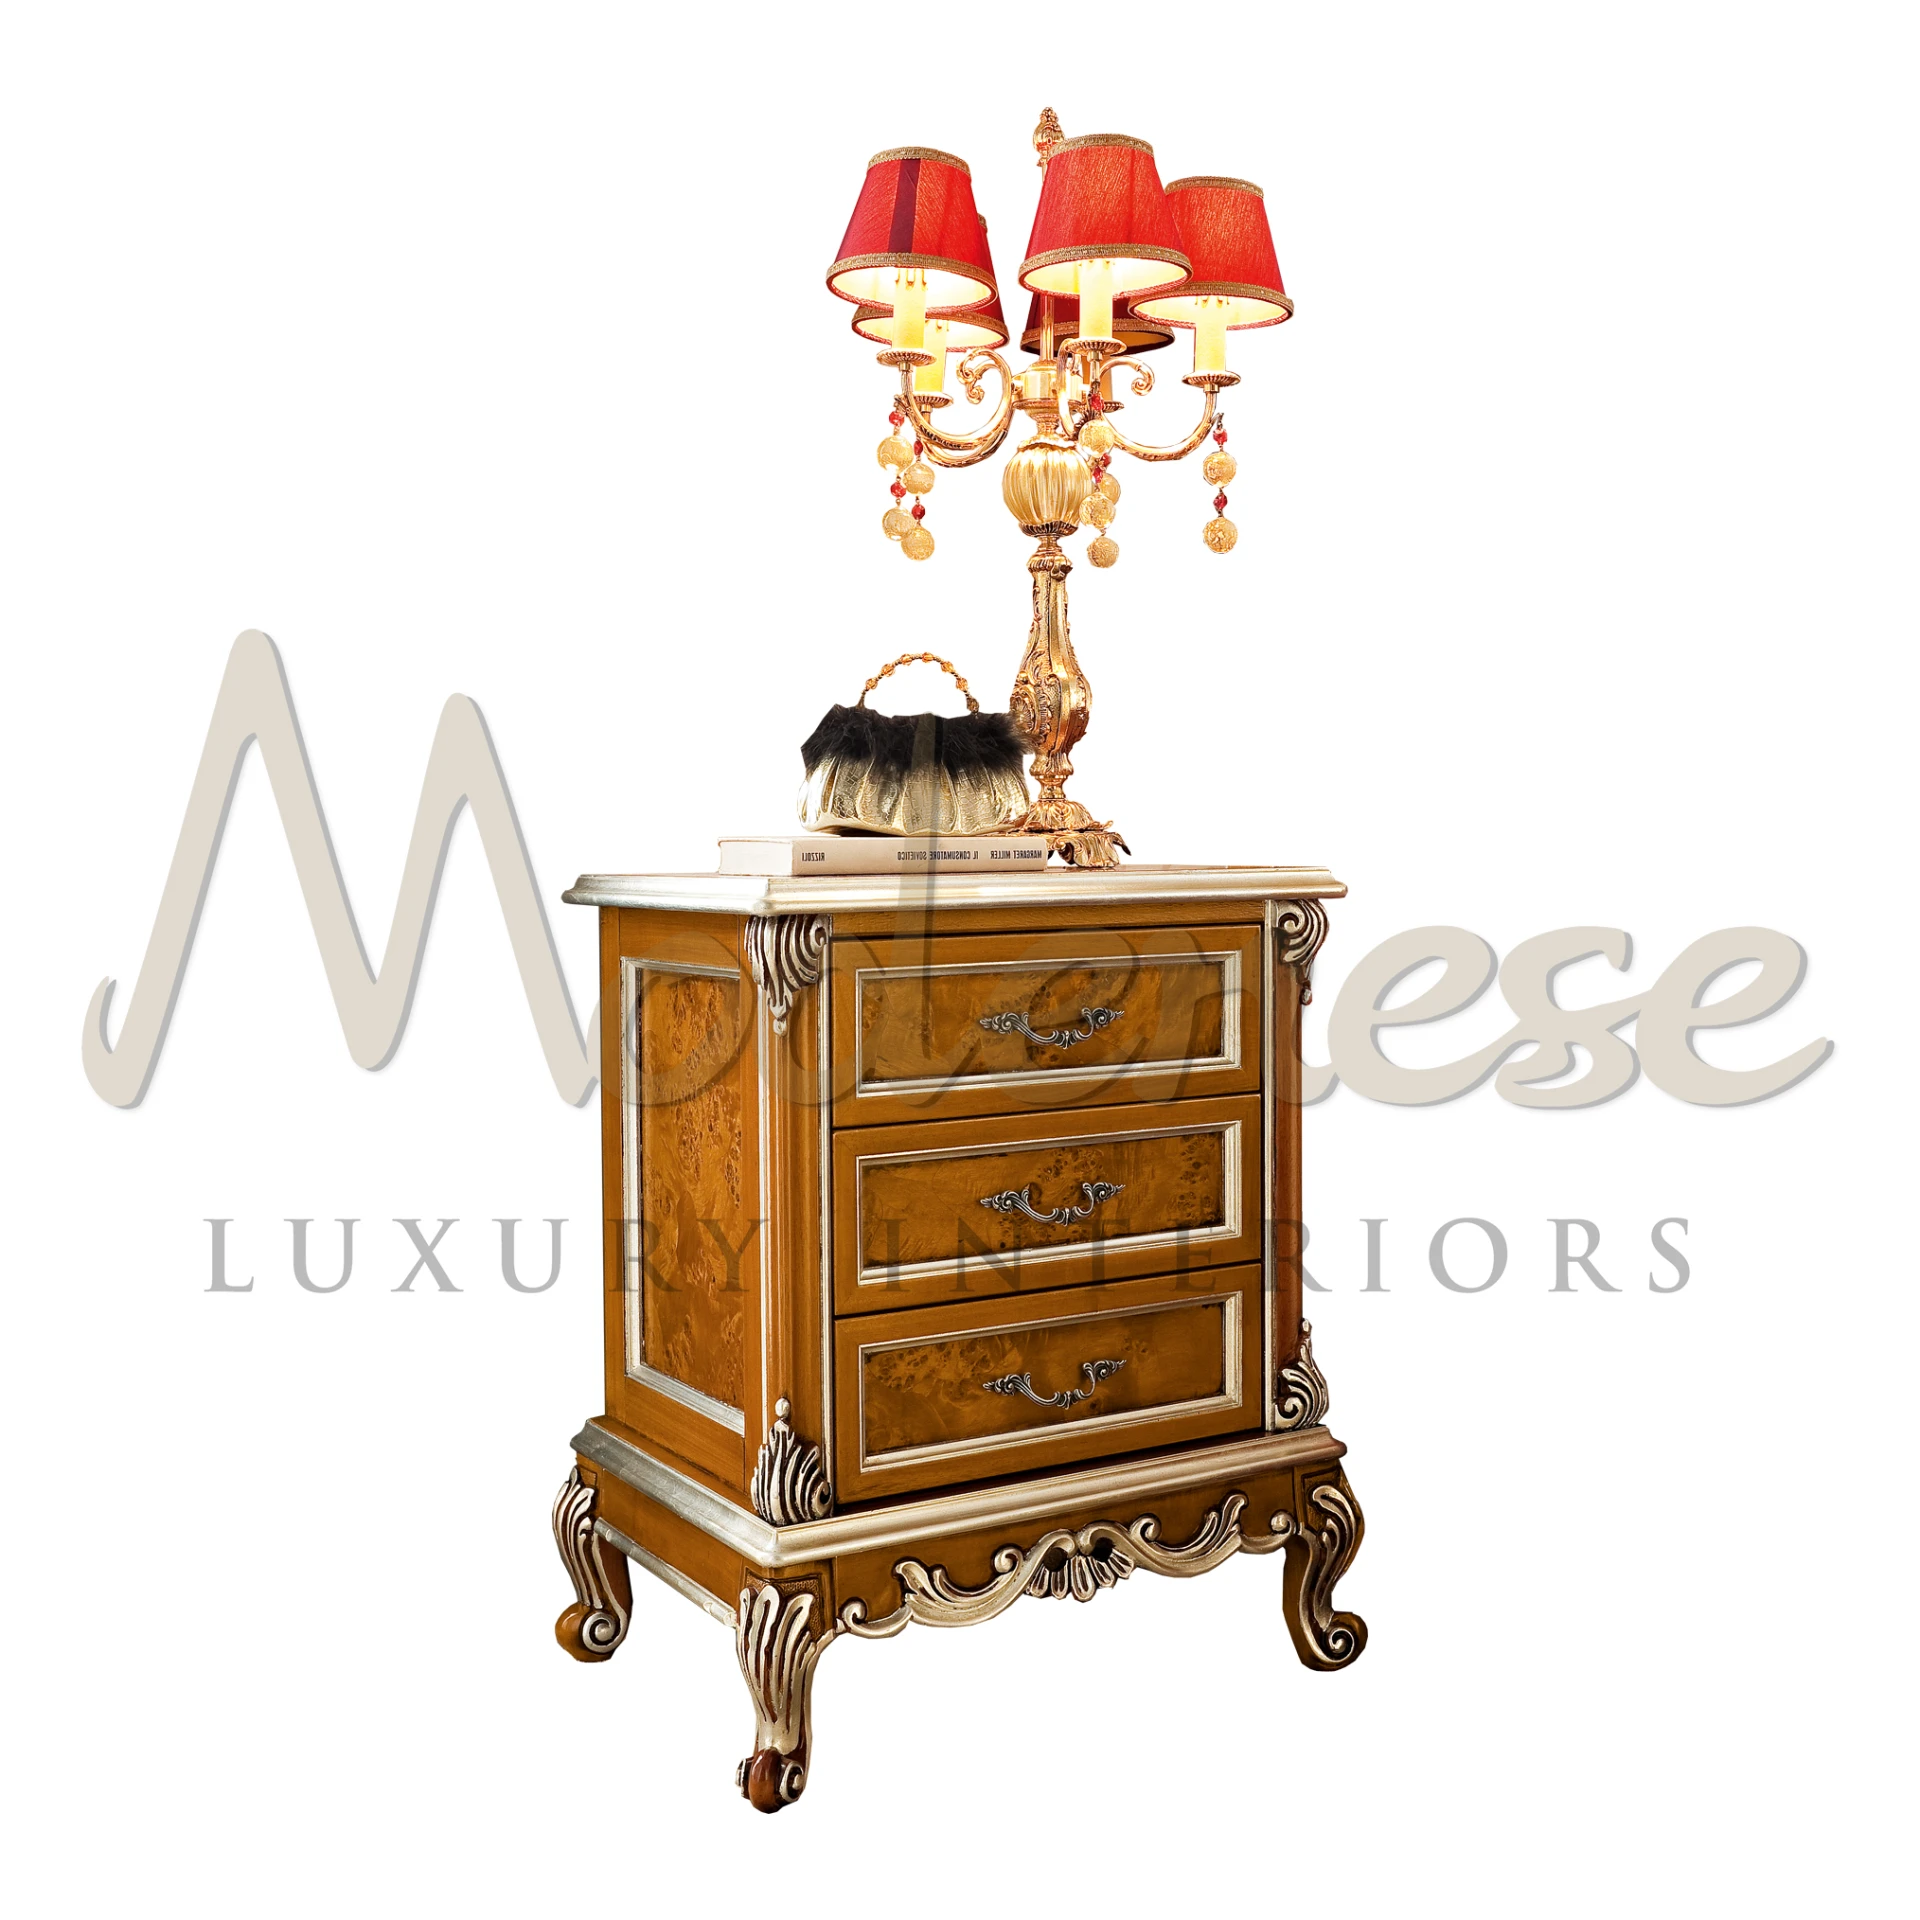 Ornate classic wooden nightstand with burl wood inlays, carved golden accents, traditional drawer handles, and a luxurious red-shaded candelabra table lamp on top.